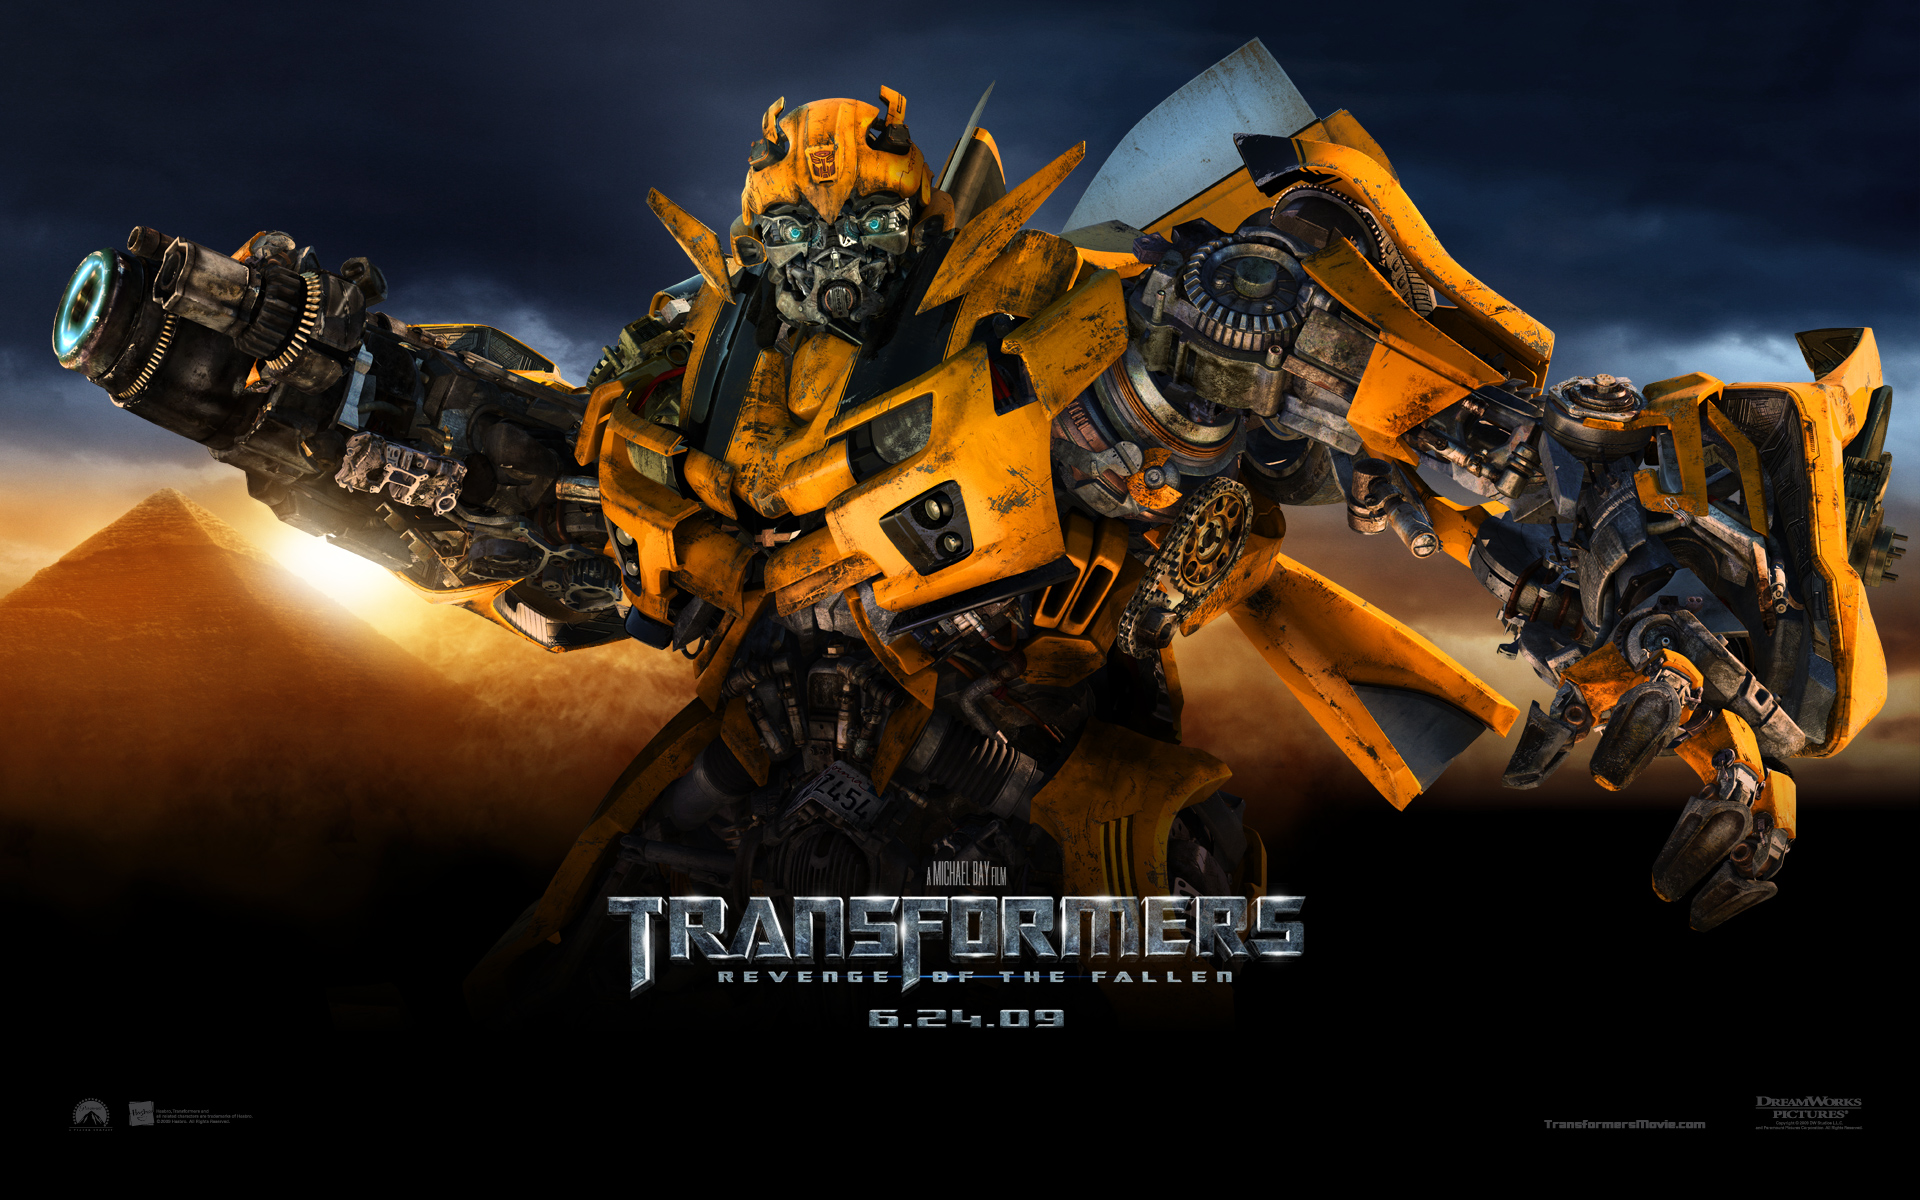  Transformers wallpapers that I have missed be sure to link it in the